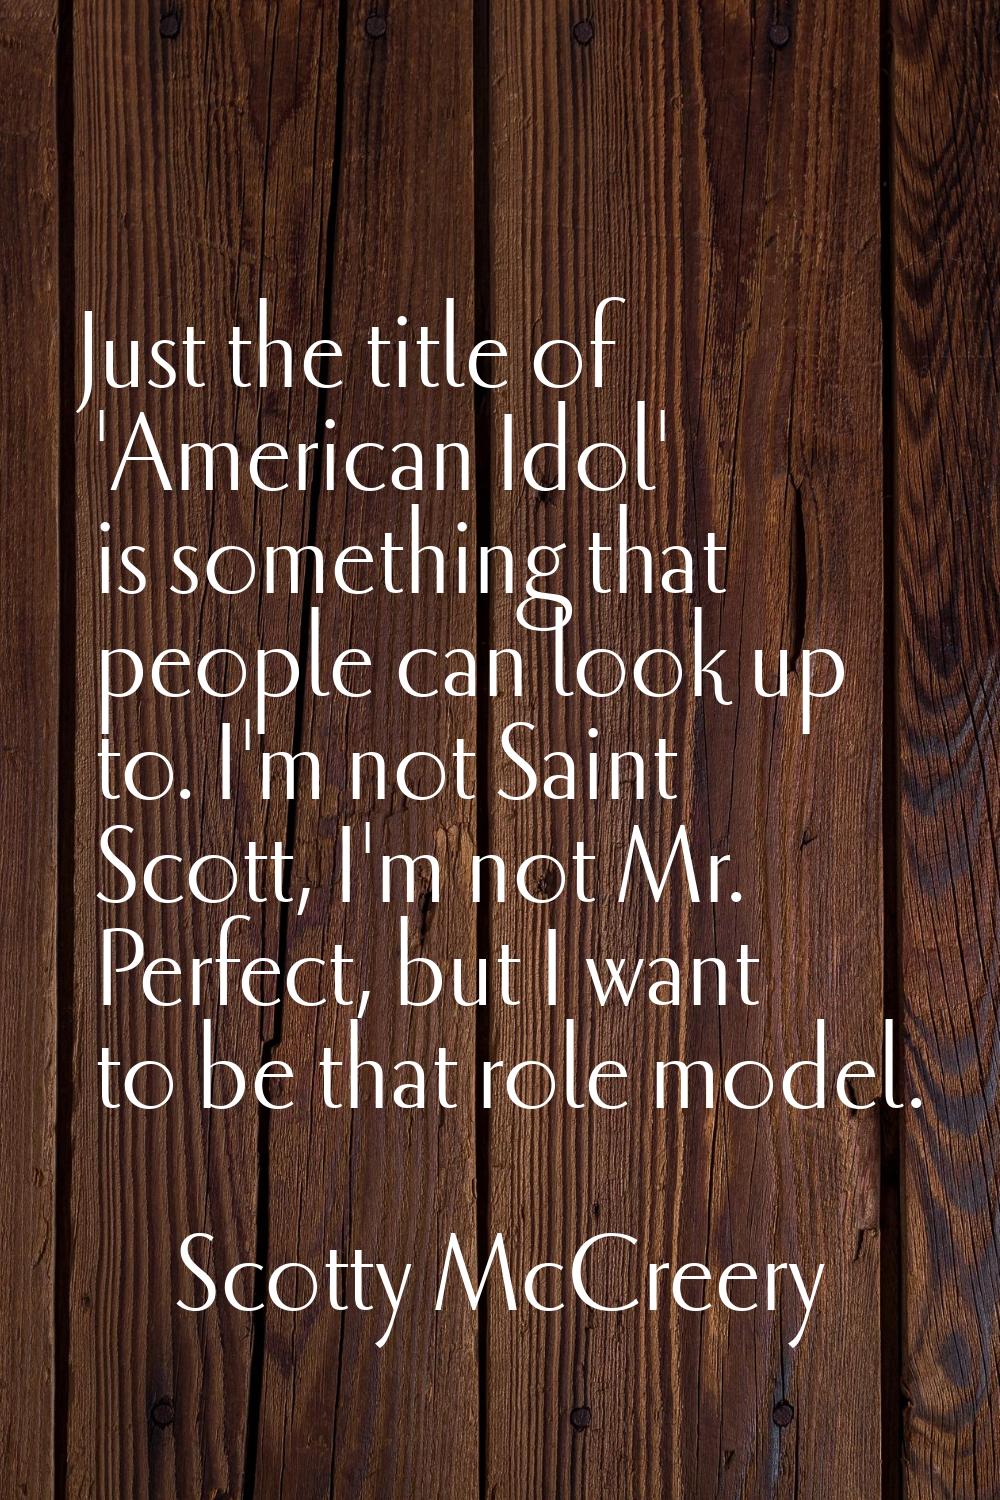 Just the title of 'American Idol' is something that people can look up to. I'm not Saint Scott, I'm